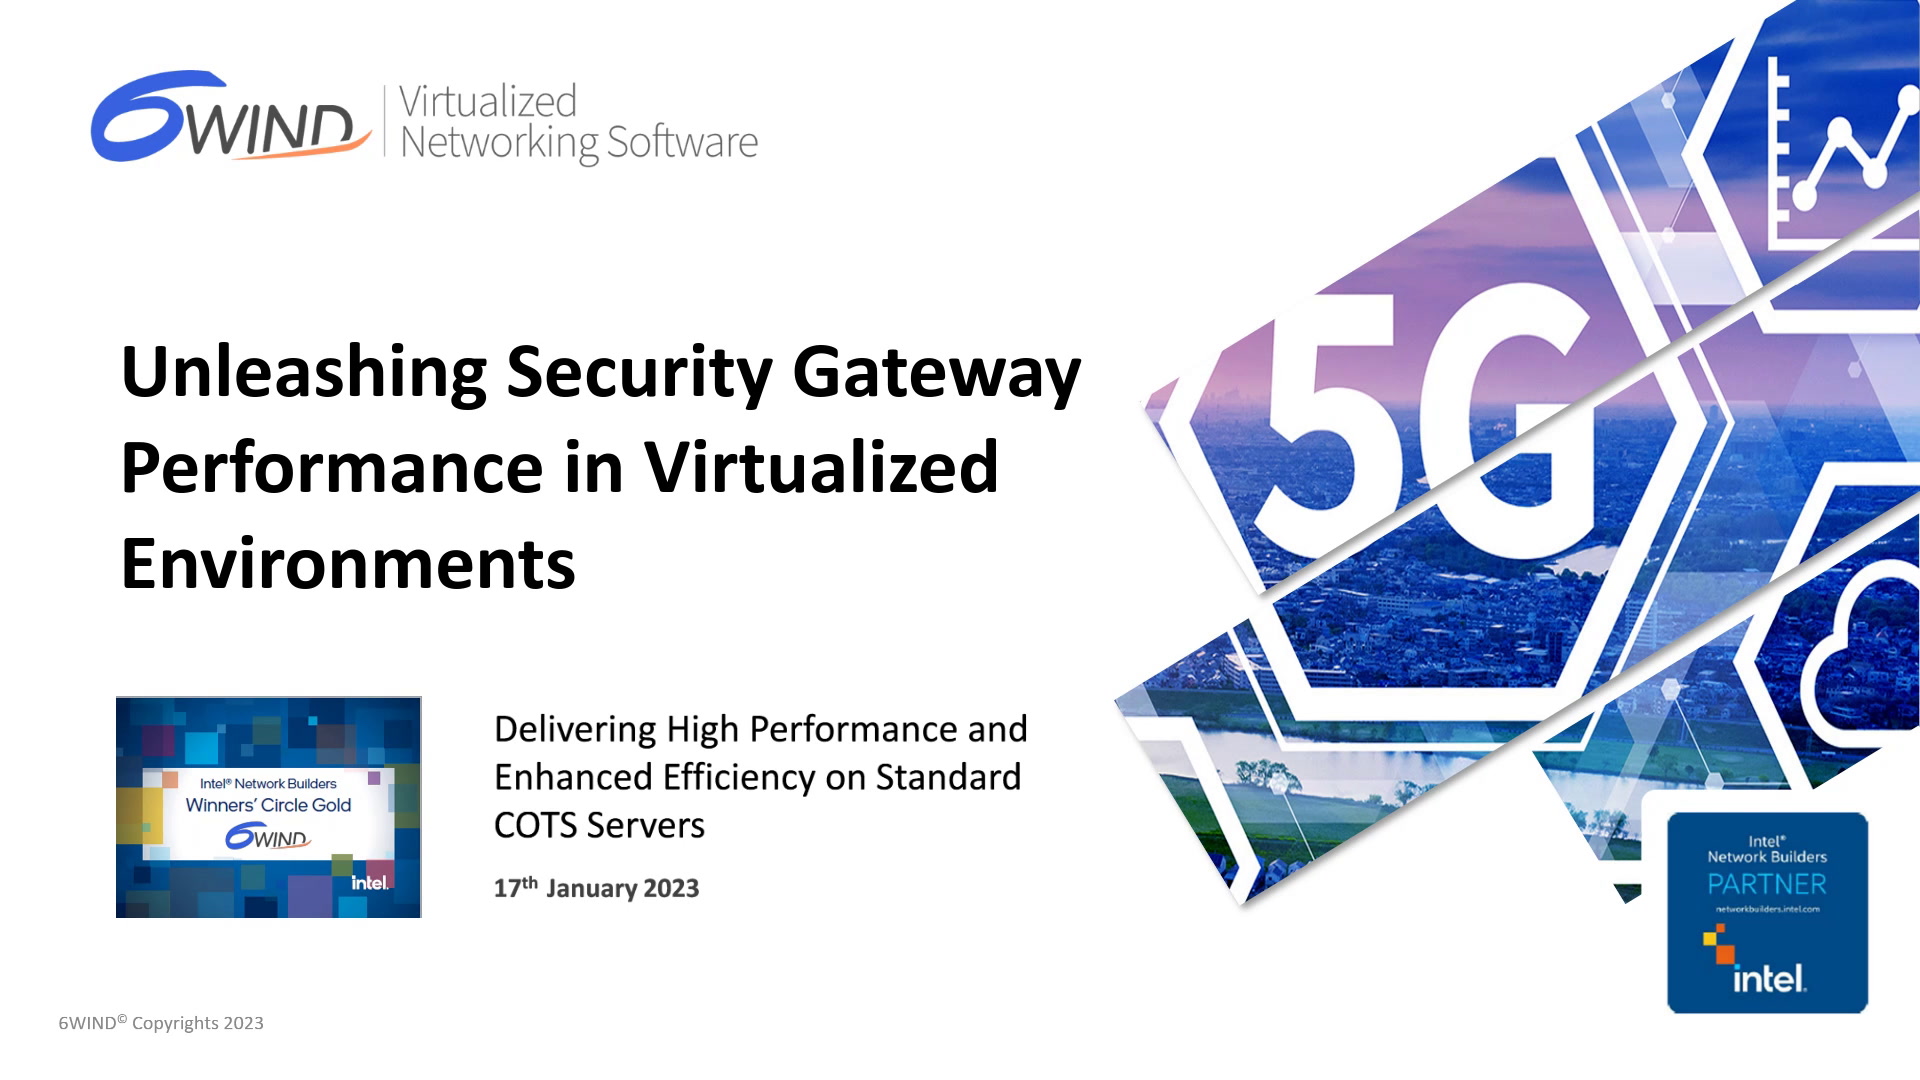 Unleashing Security Gateway Performance in Virtualized Environments